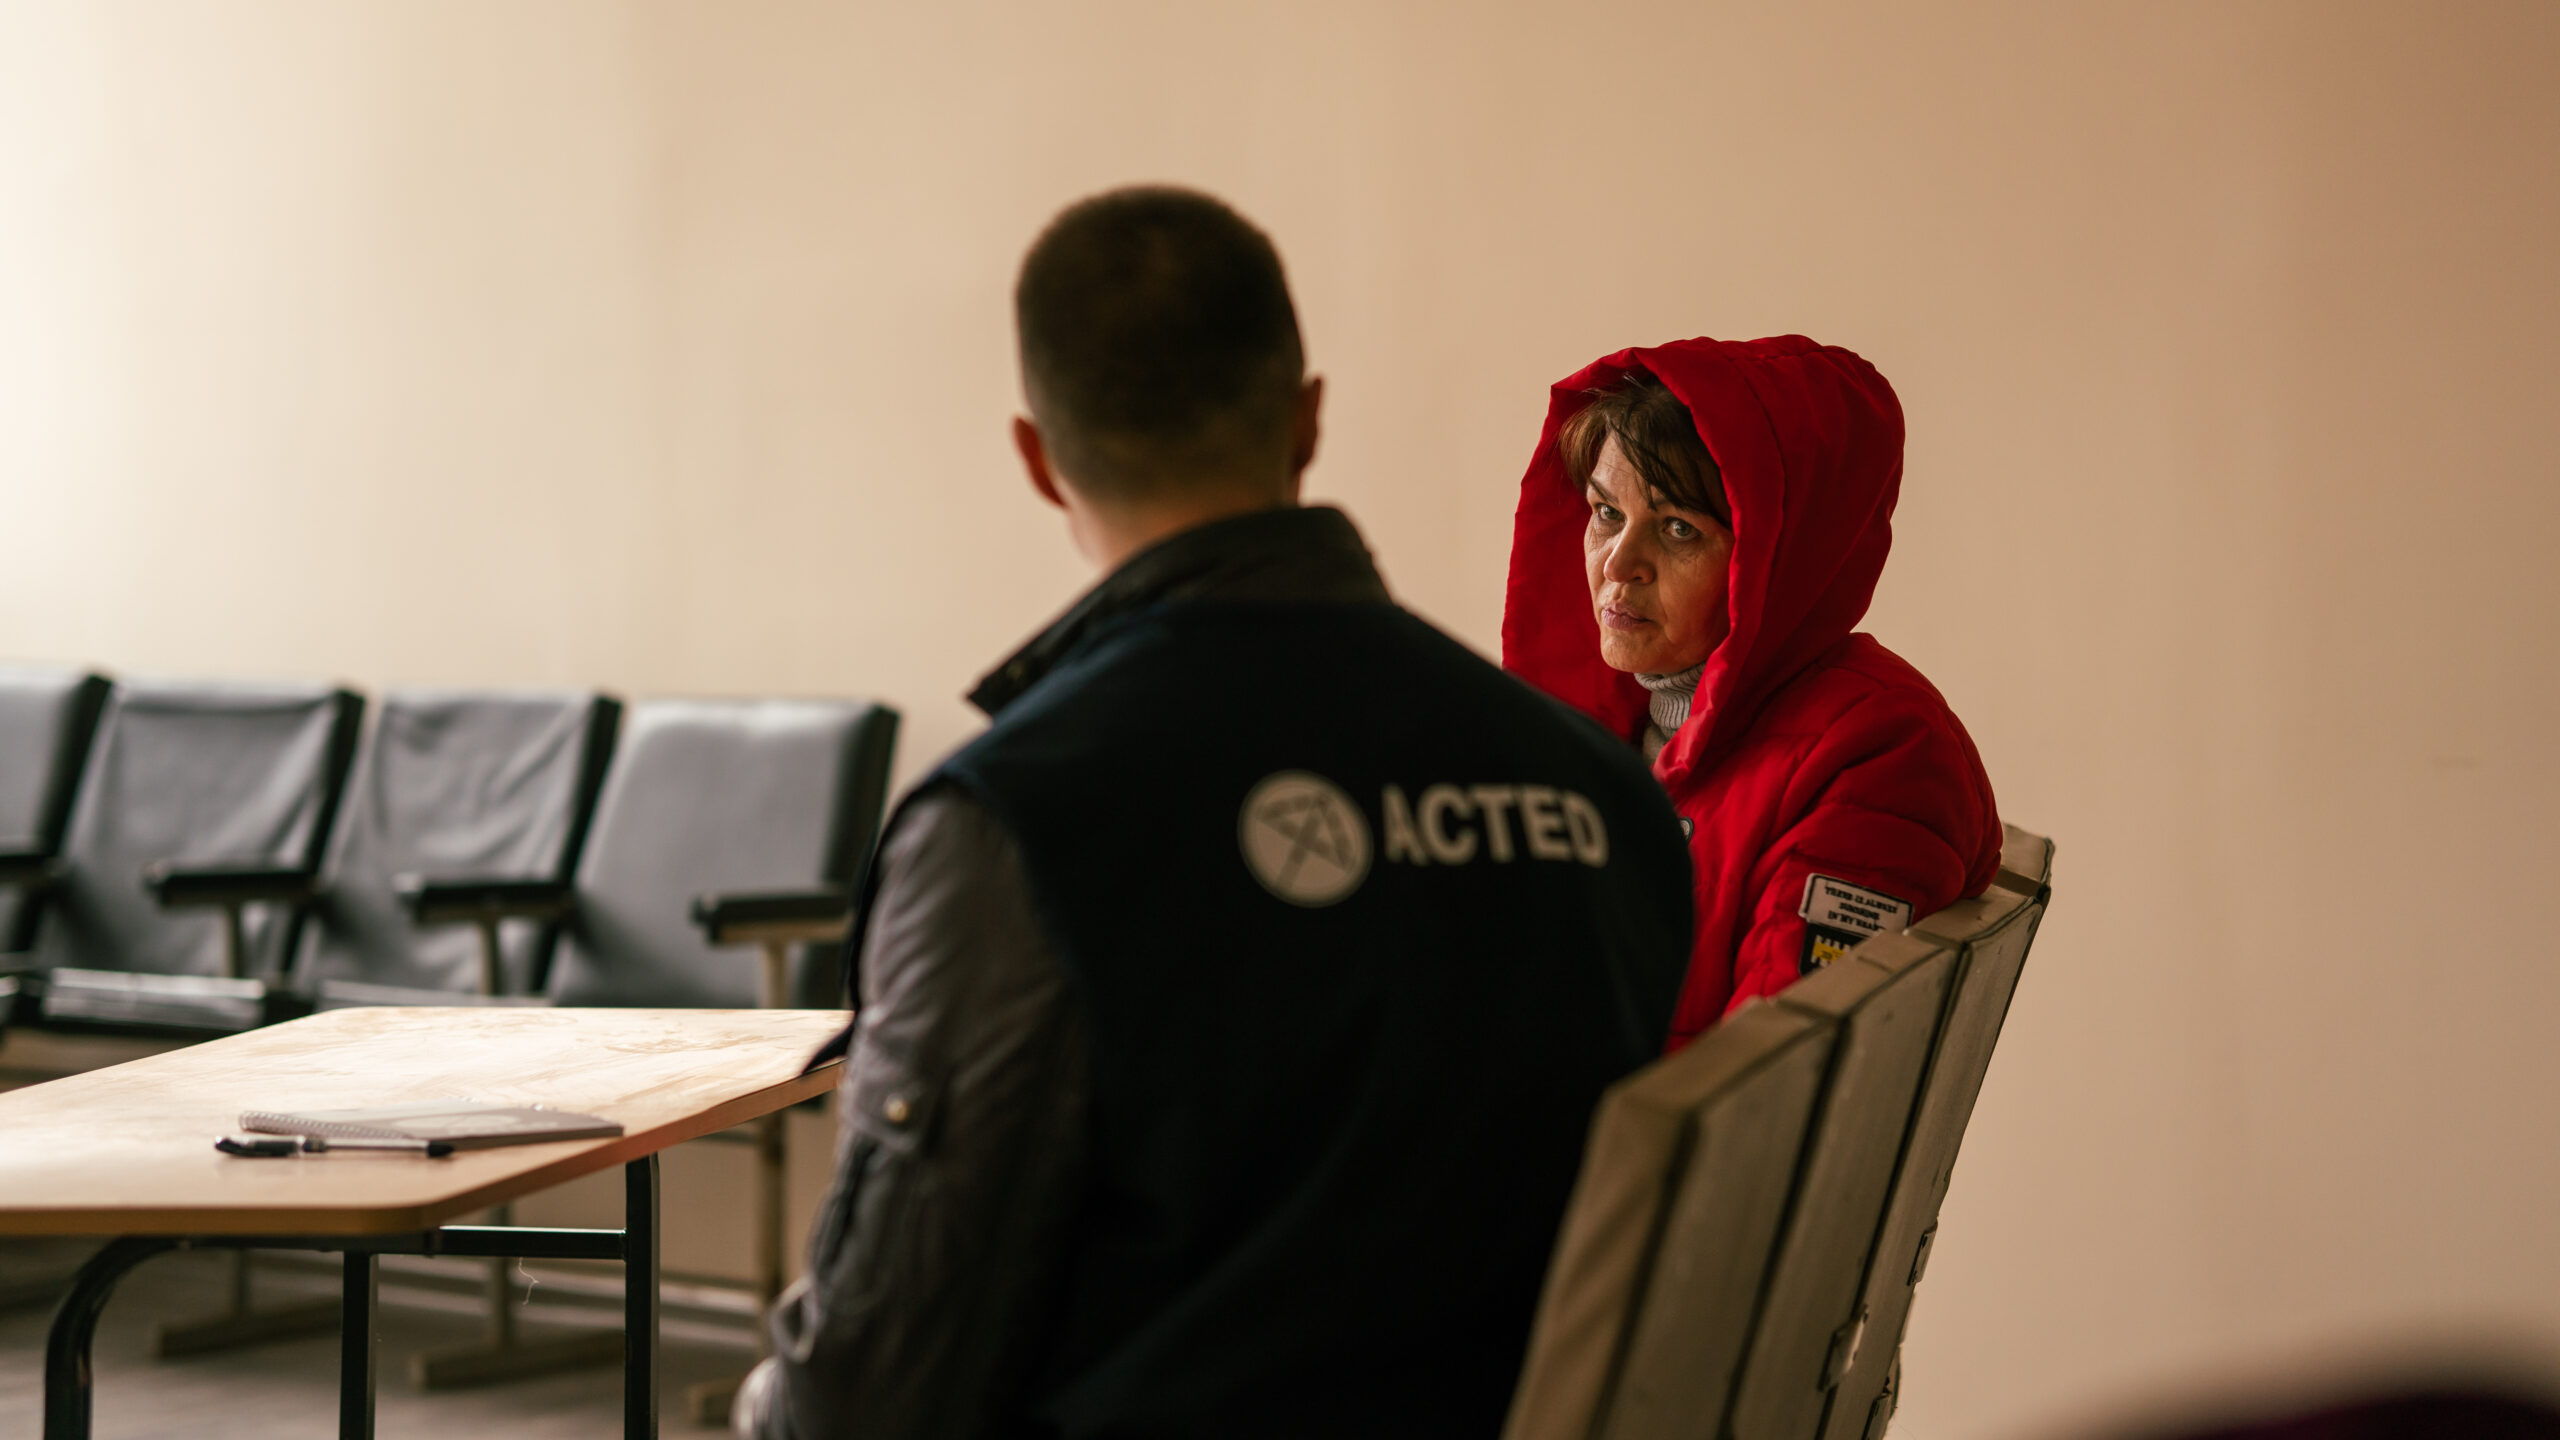 In Ukraine, Acted supports war-affected people who fled their villages with multi-purpose cash assistance pic